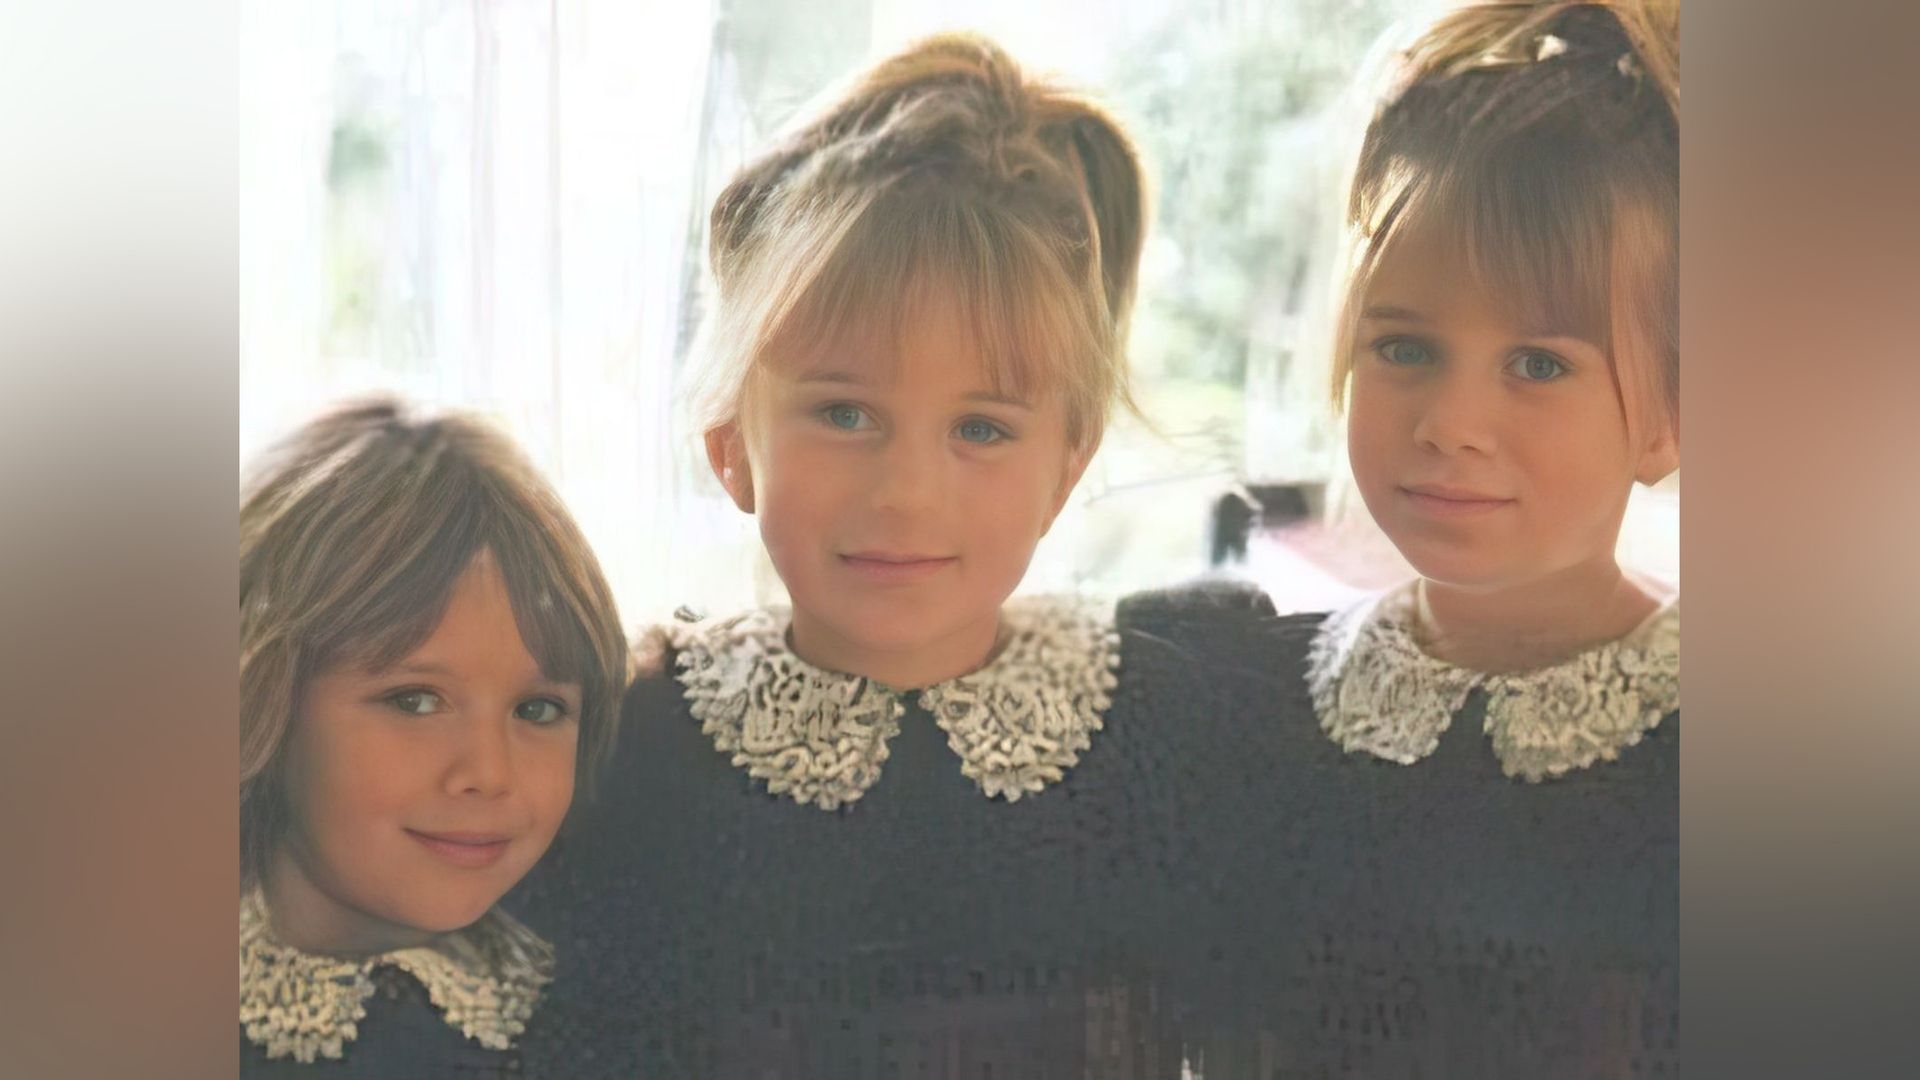 Elizabeth Olsen as a child (left) with her sisters